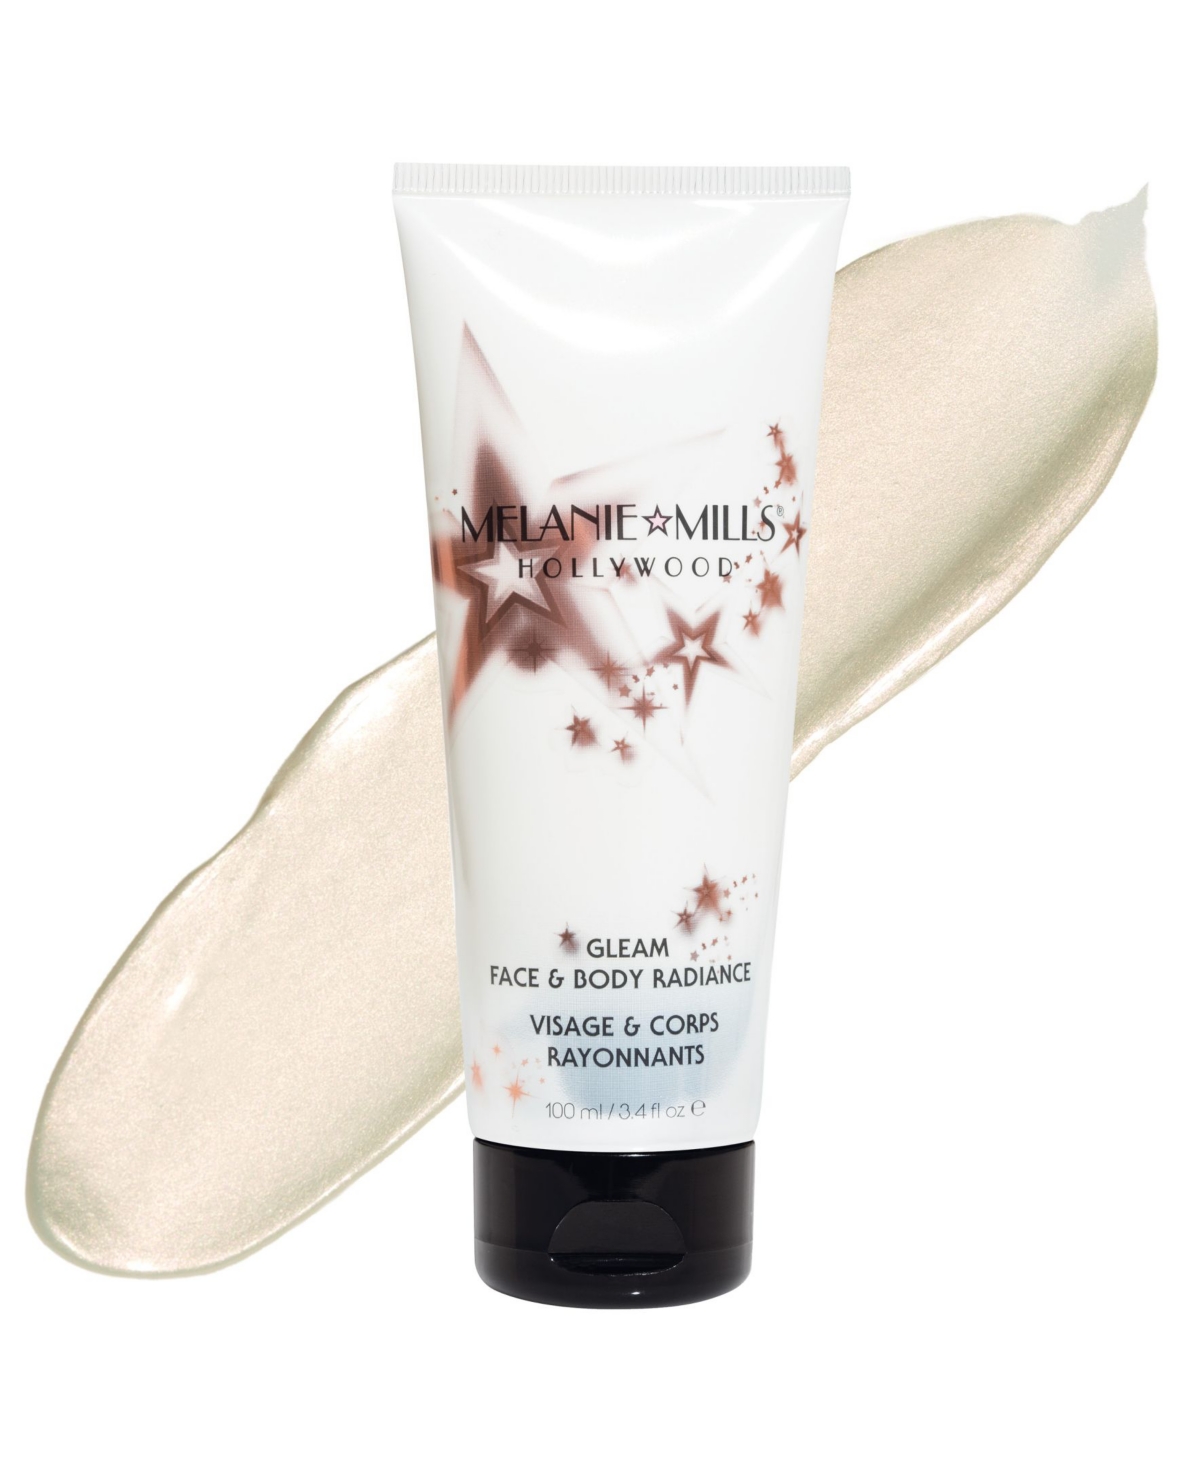 Melanie Mills Hollywood Gleam Face and Body Radiance All in One Makeup, Moisturizer and Glow, 3.4 oz